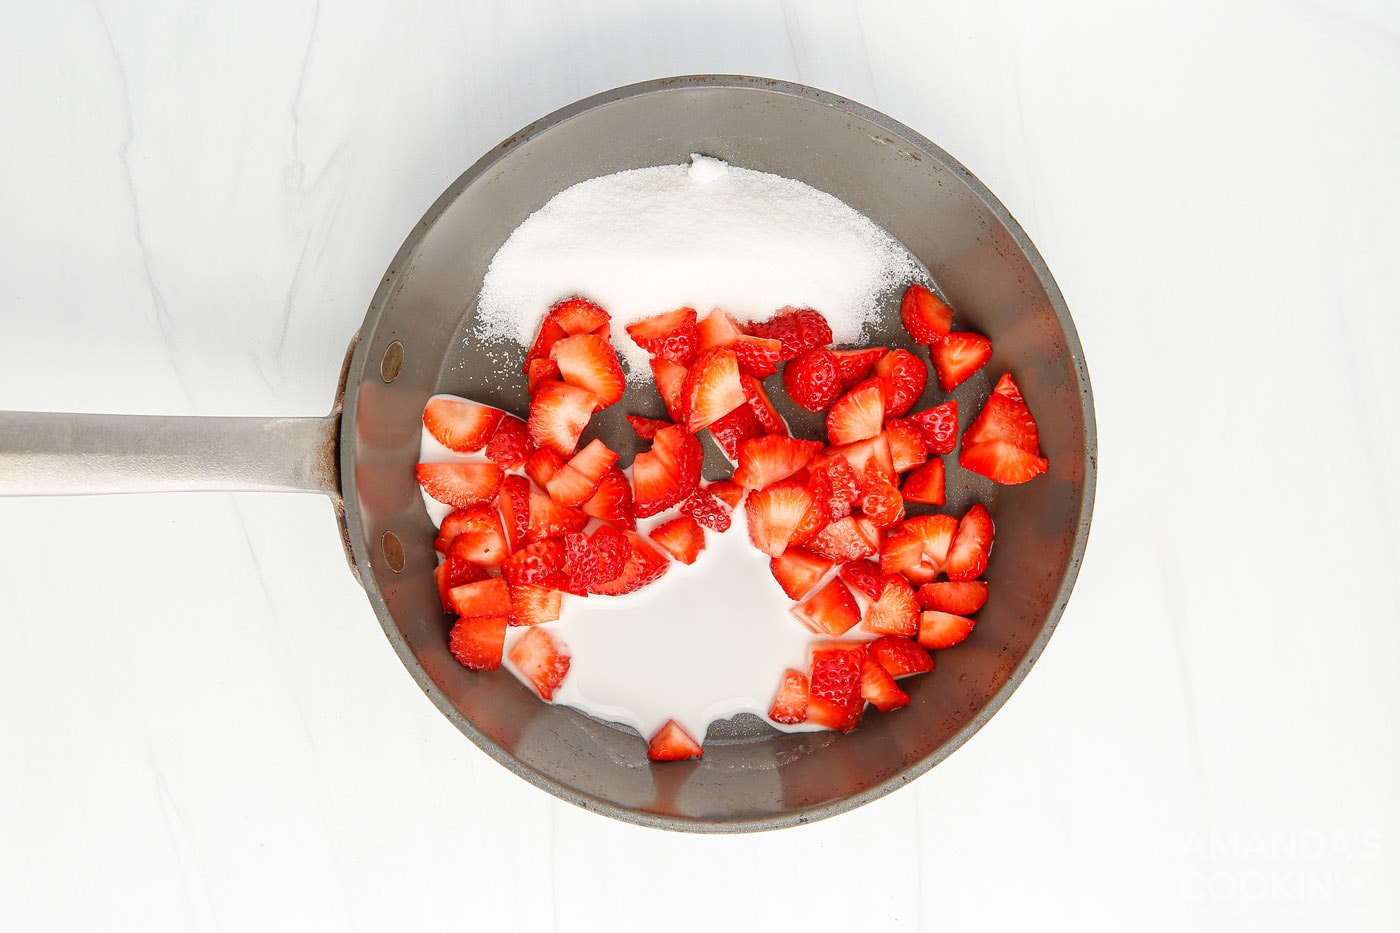 strawberries with sugar and cornstarch in a bowl